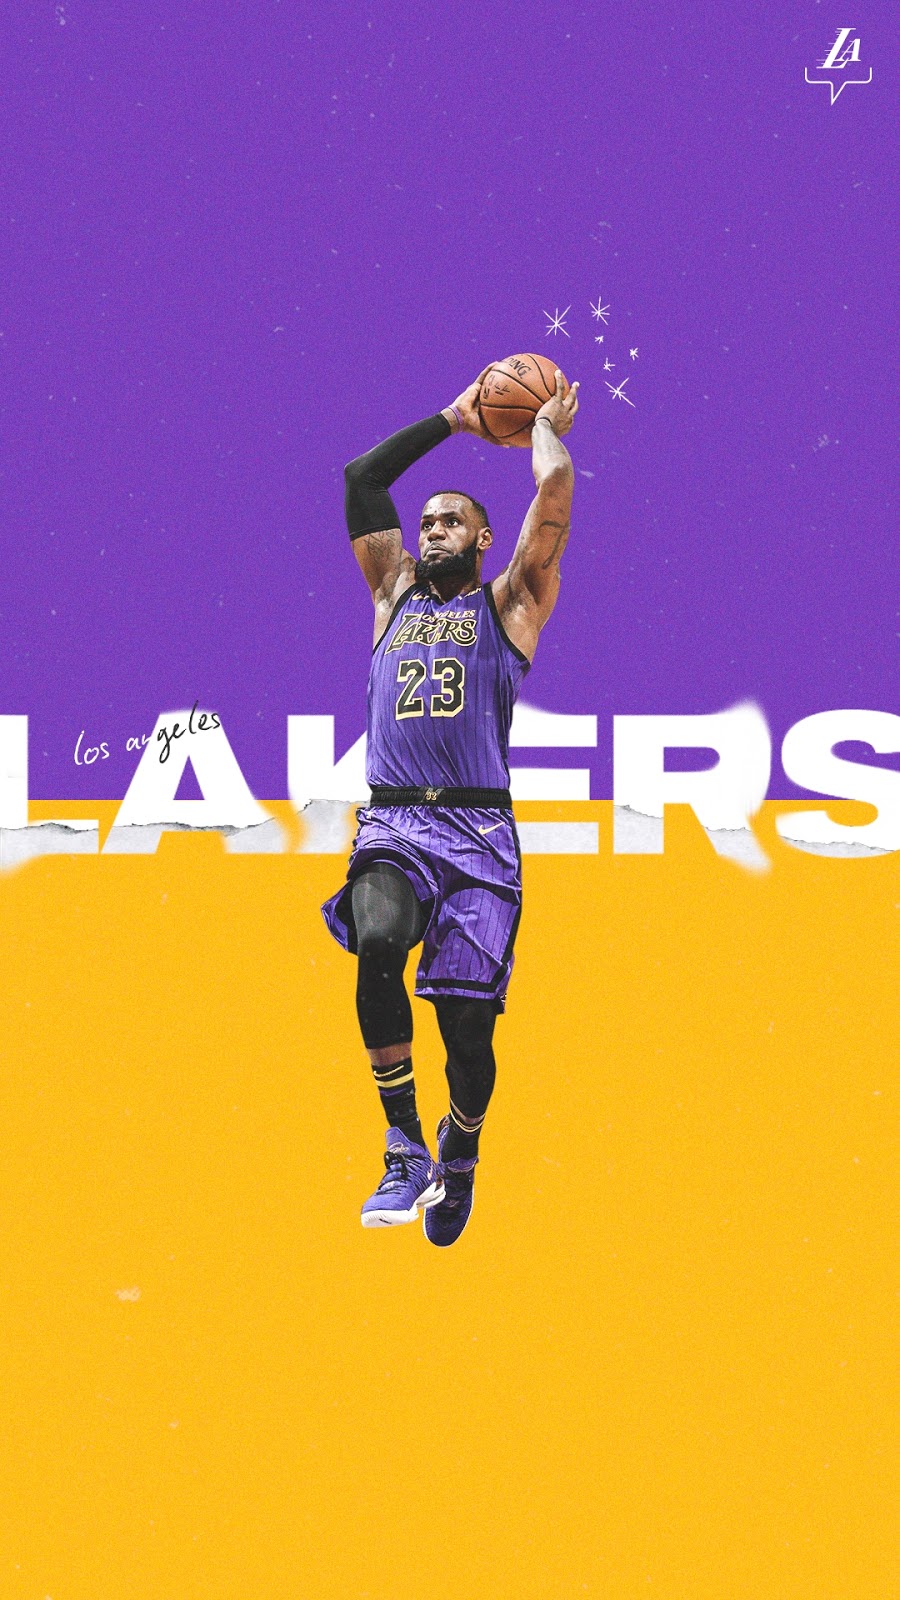 Los Angeles Lakers phone wallpaper 1080P 2k 4k Full HD Wallpapers  Backgrounds Free Download  Wallpaper Crafter